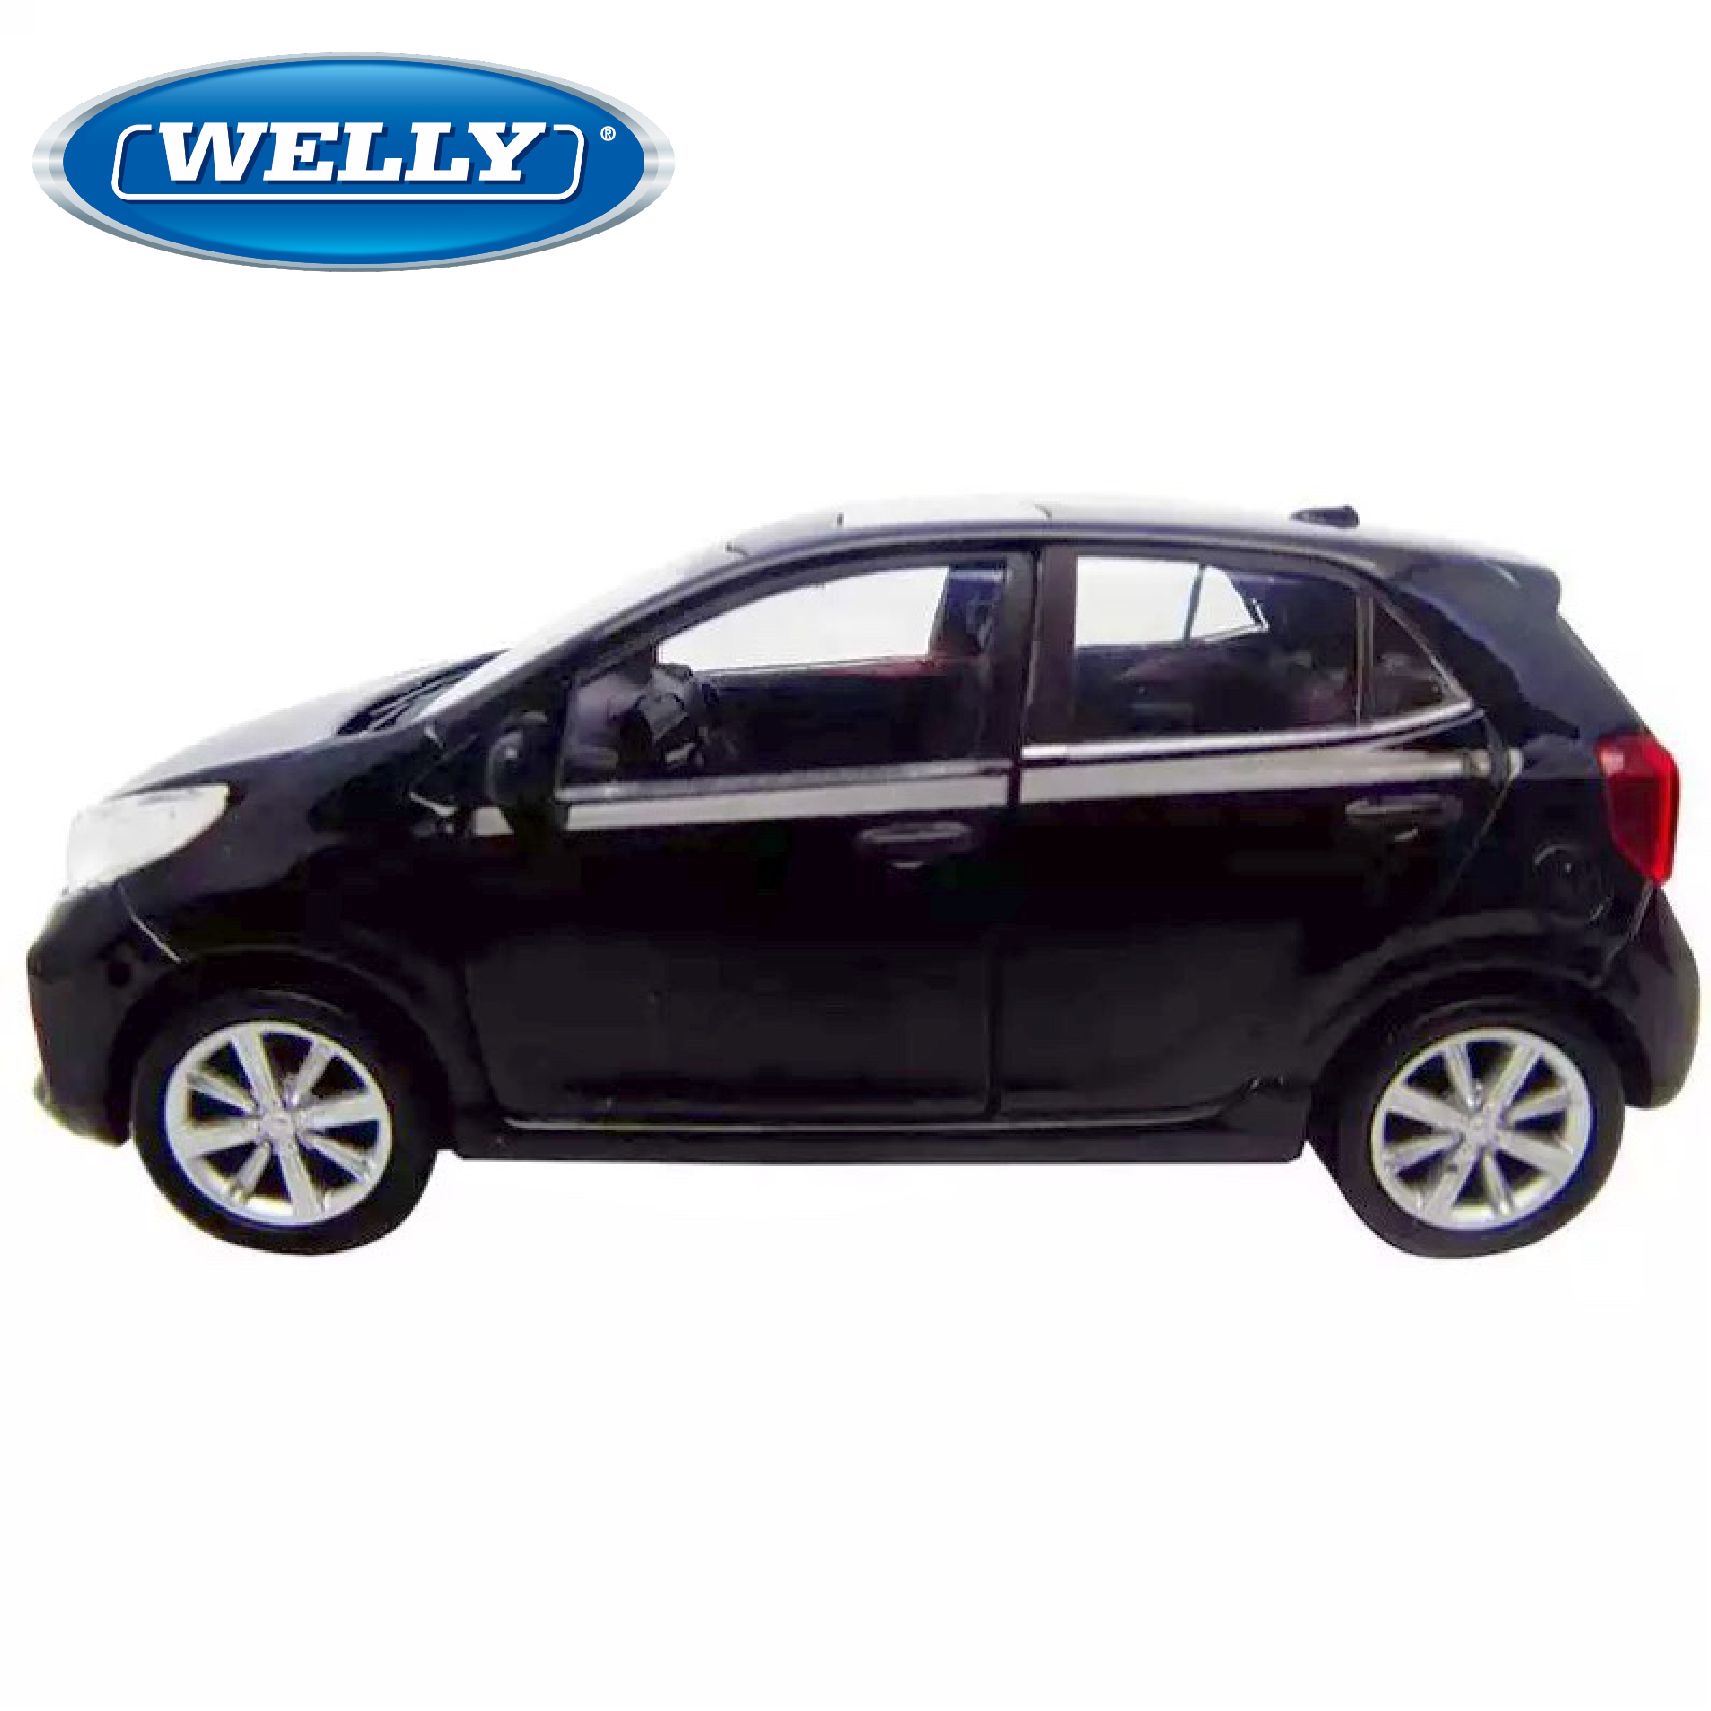 WELLY KIA NEW PICANTO BLACK 1:34 DIE CAST METAL NEW IN BOX 